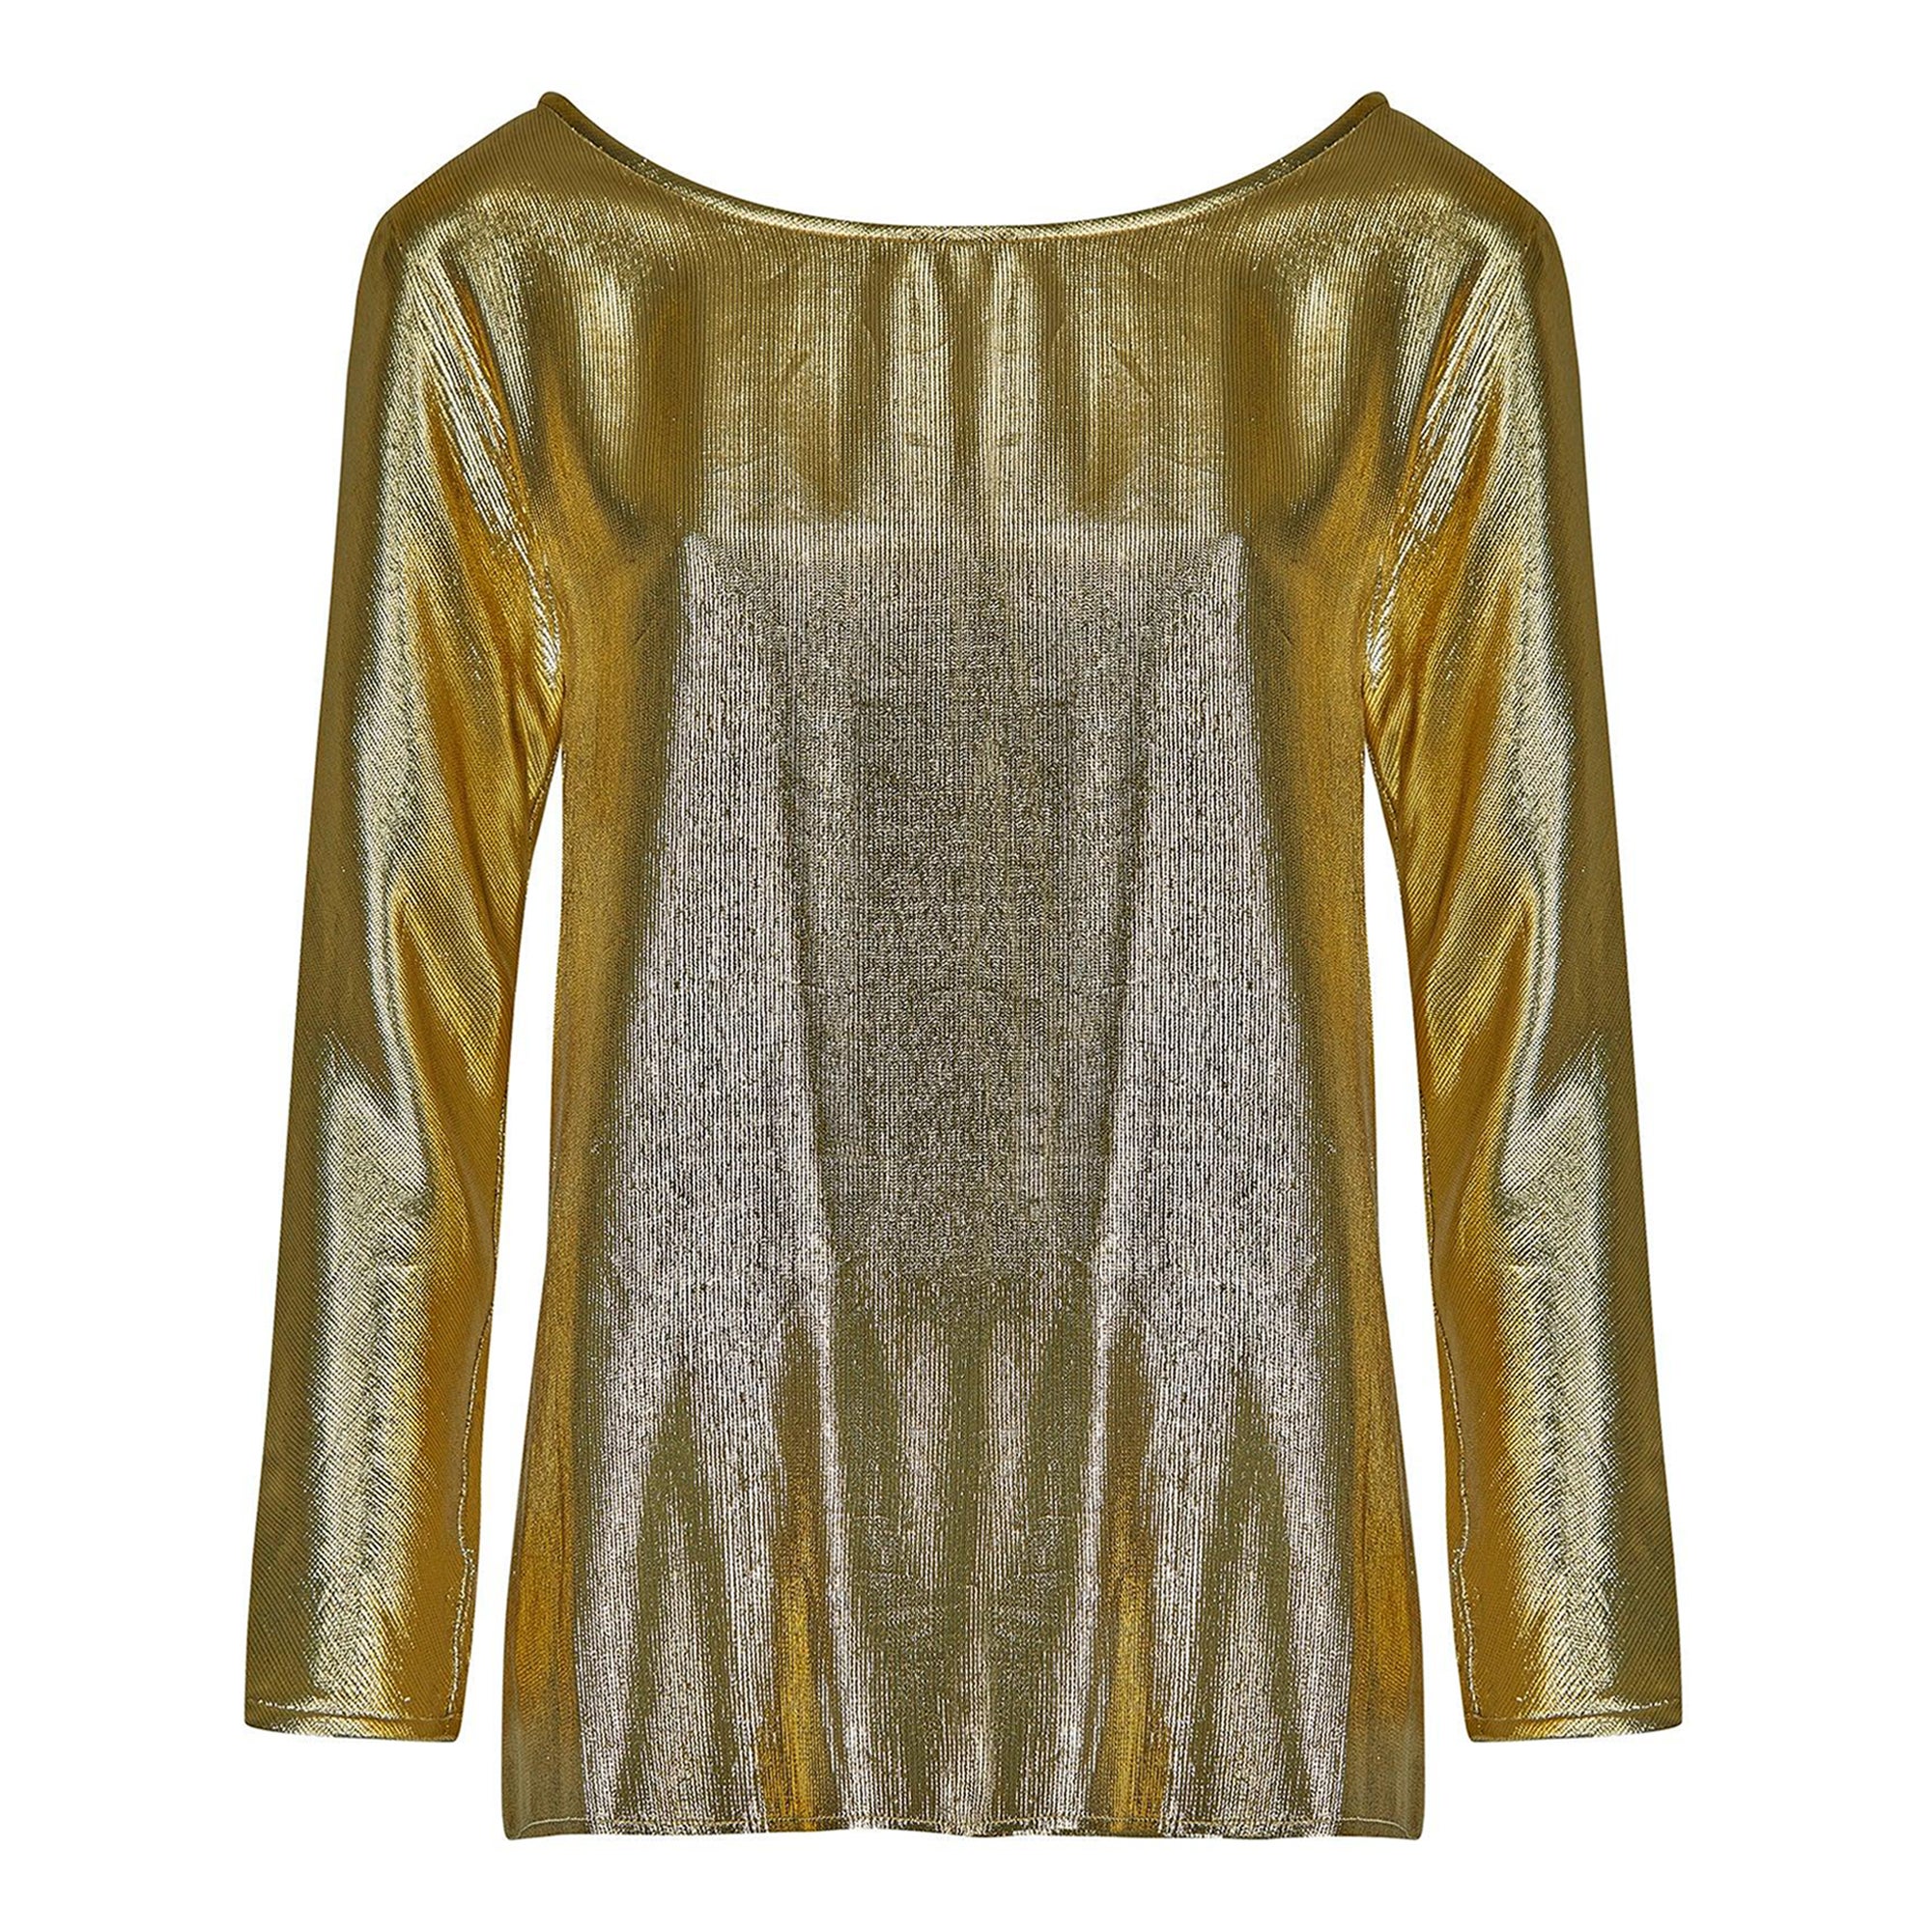 1991 Documented Yves Saint Laurent Gold Metallic Lame Top For Sale